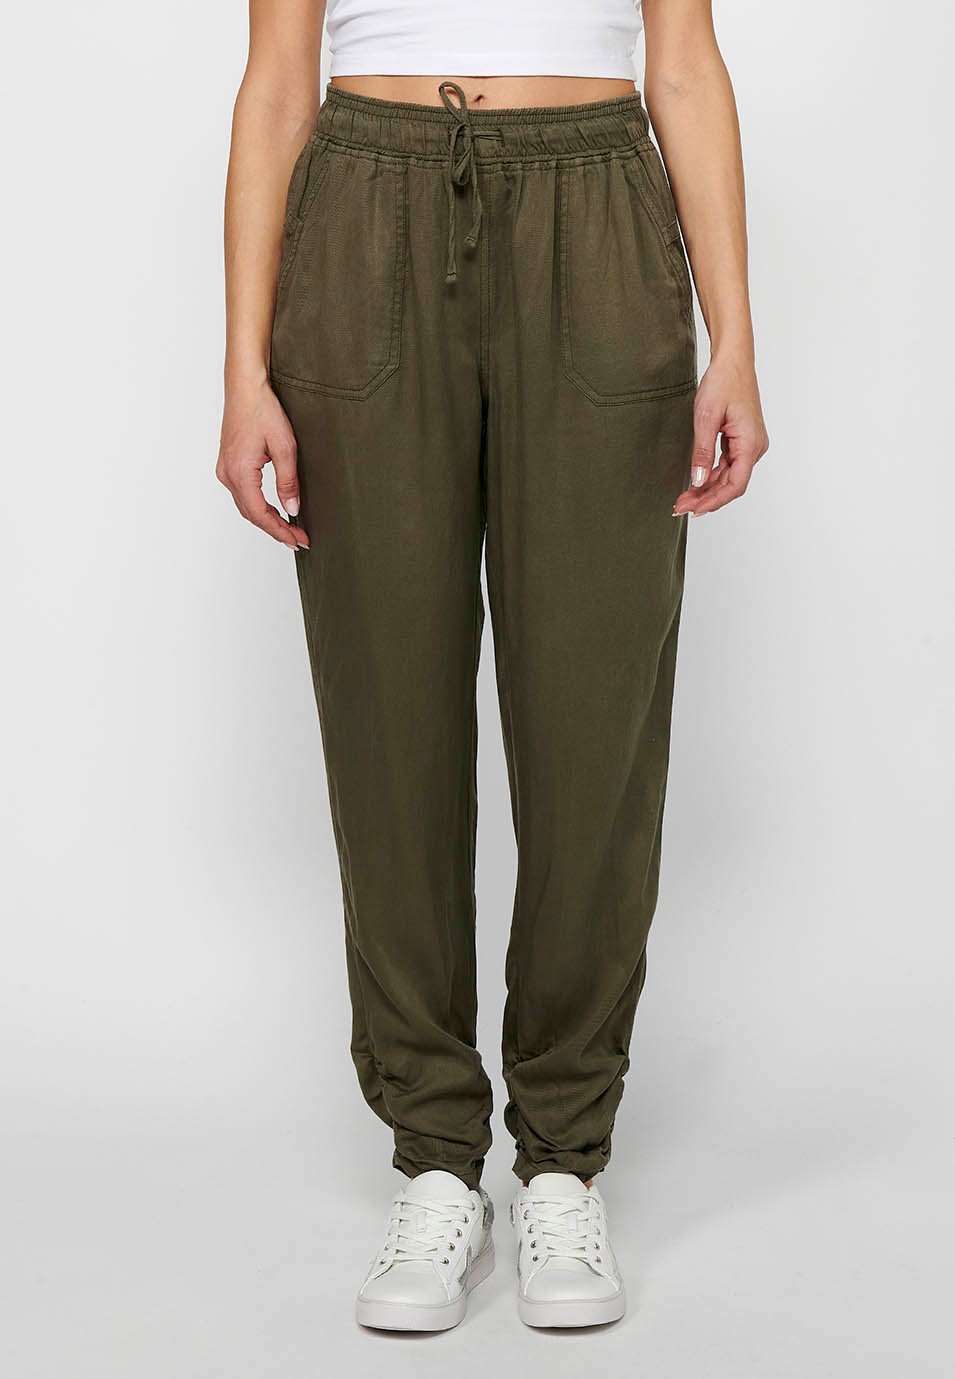 Long jogger pants with curled finish and rubberized waist with four pockets, two rear pockets with flap in Khaki color for women 1